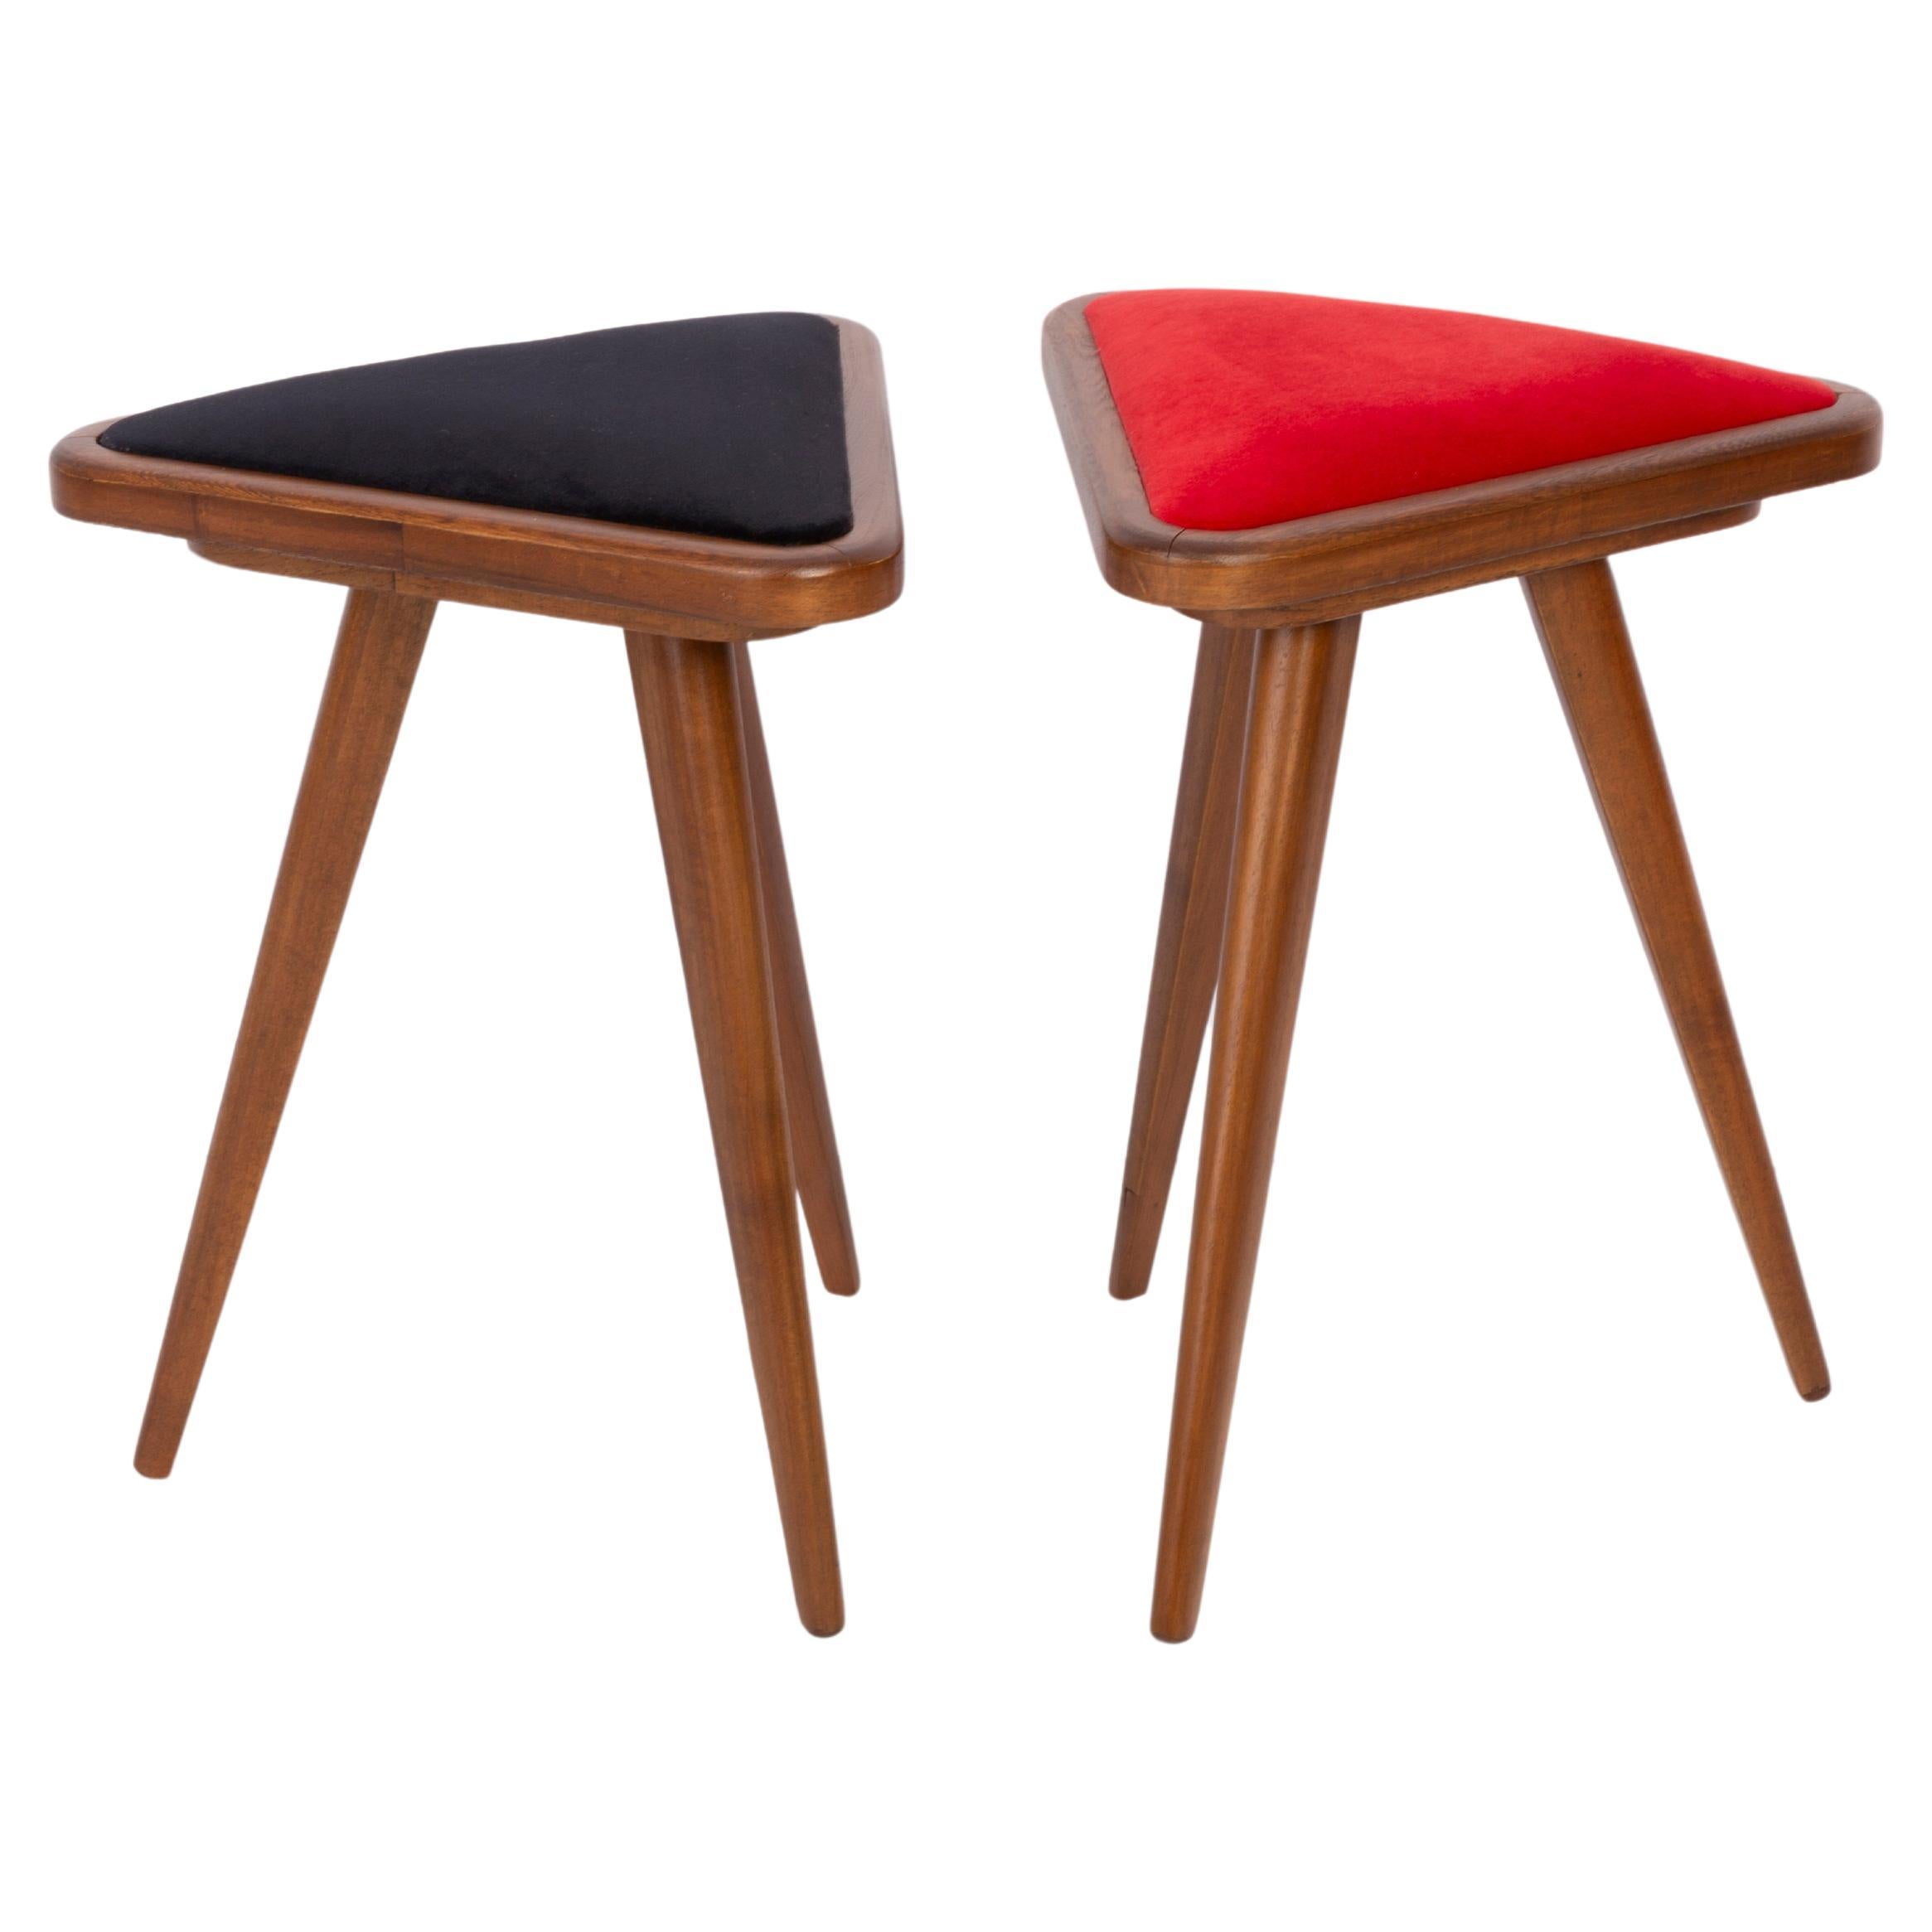 Set of Two Black and Red Velvet 20th Century Triangle Stools, 1960s